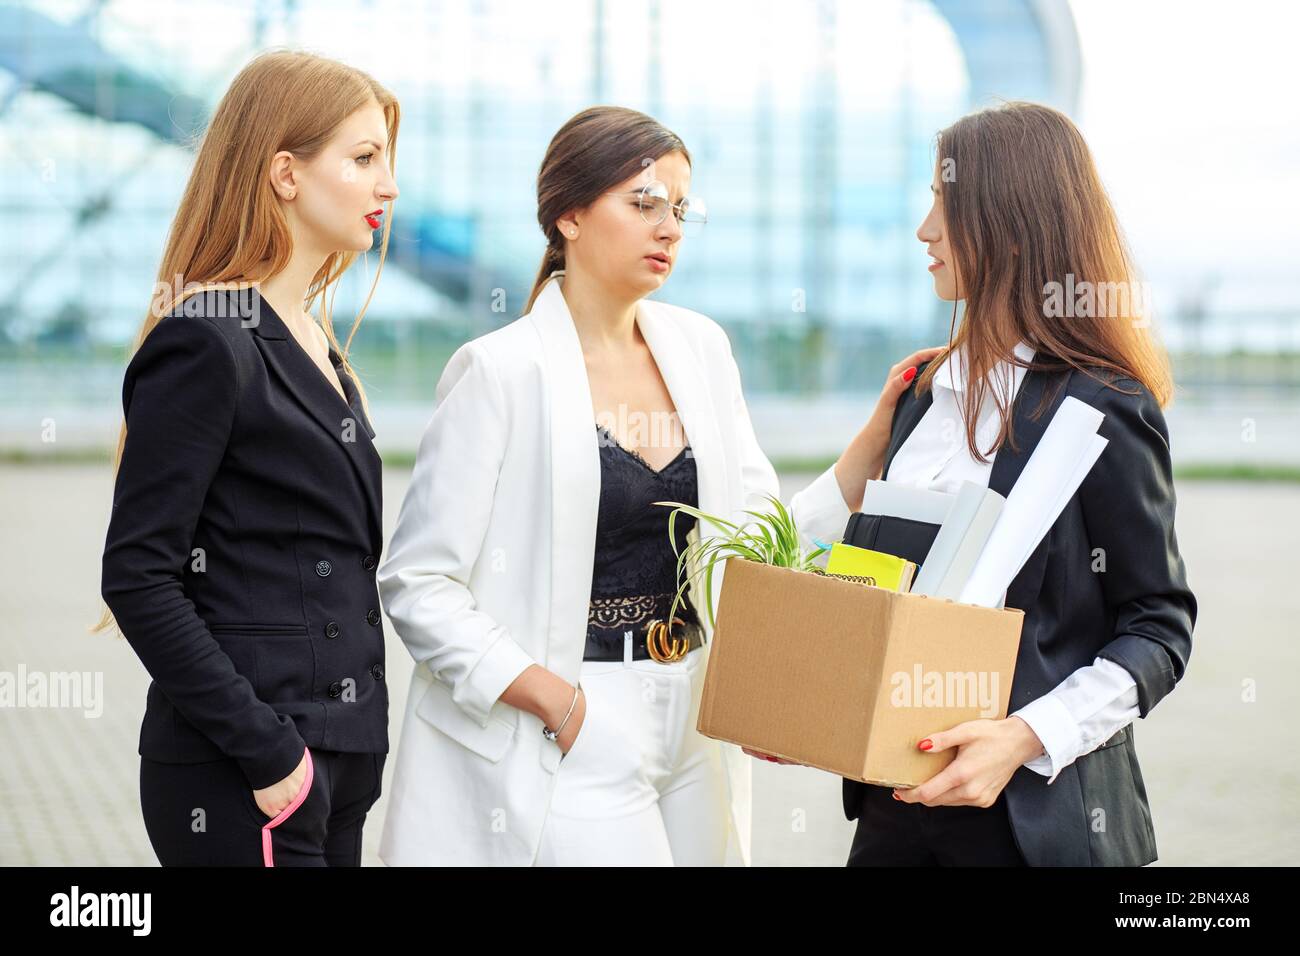 Layoffs from work. Woman says goodbye to colleagues. The end of a career. Concept for business, unemployment, labor exchange and dismissal. Stock Photo